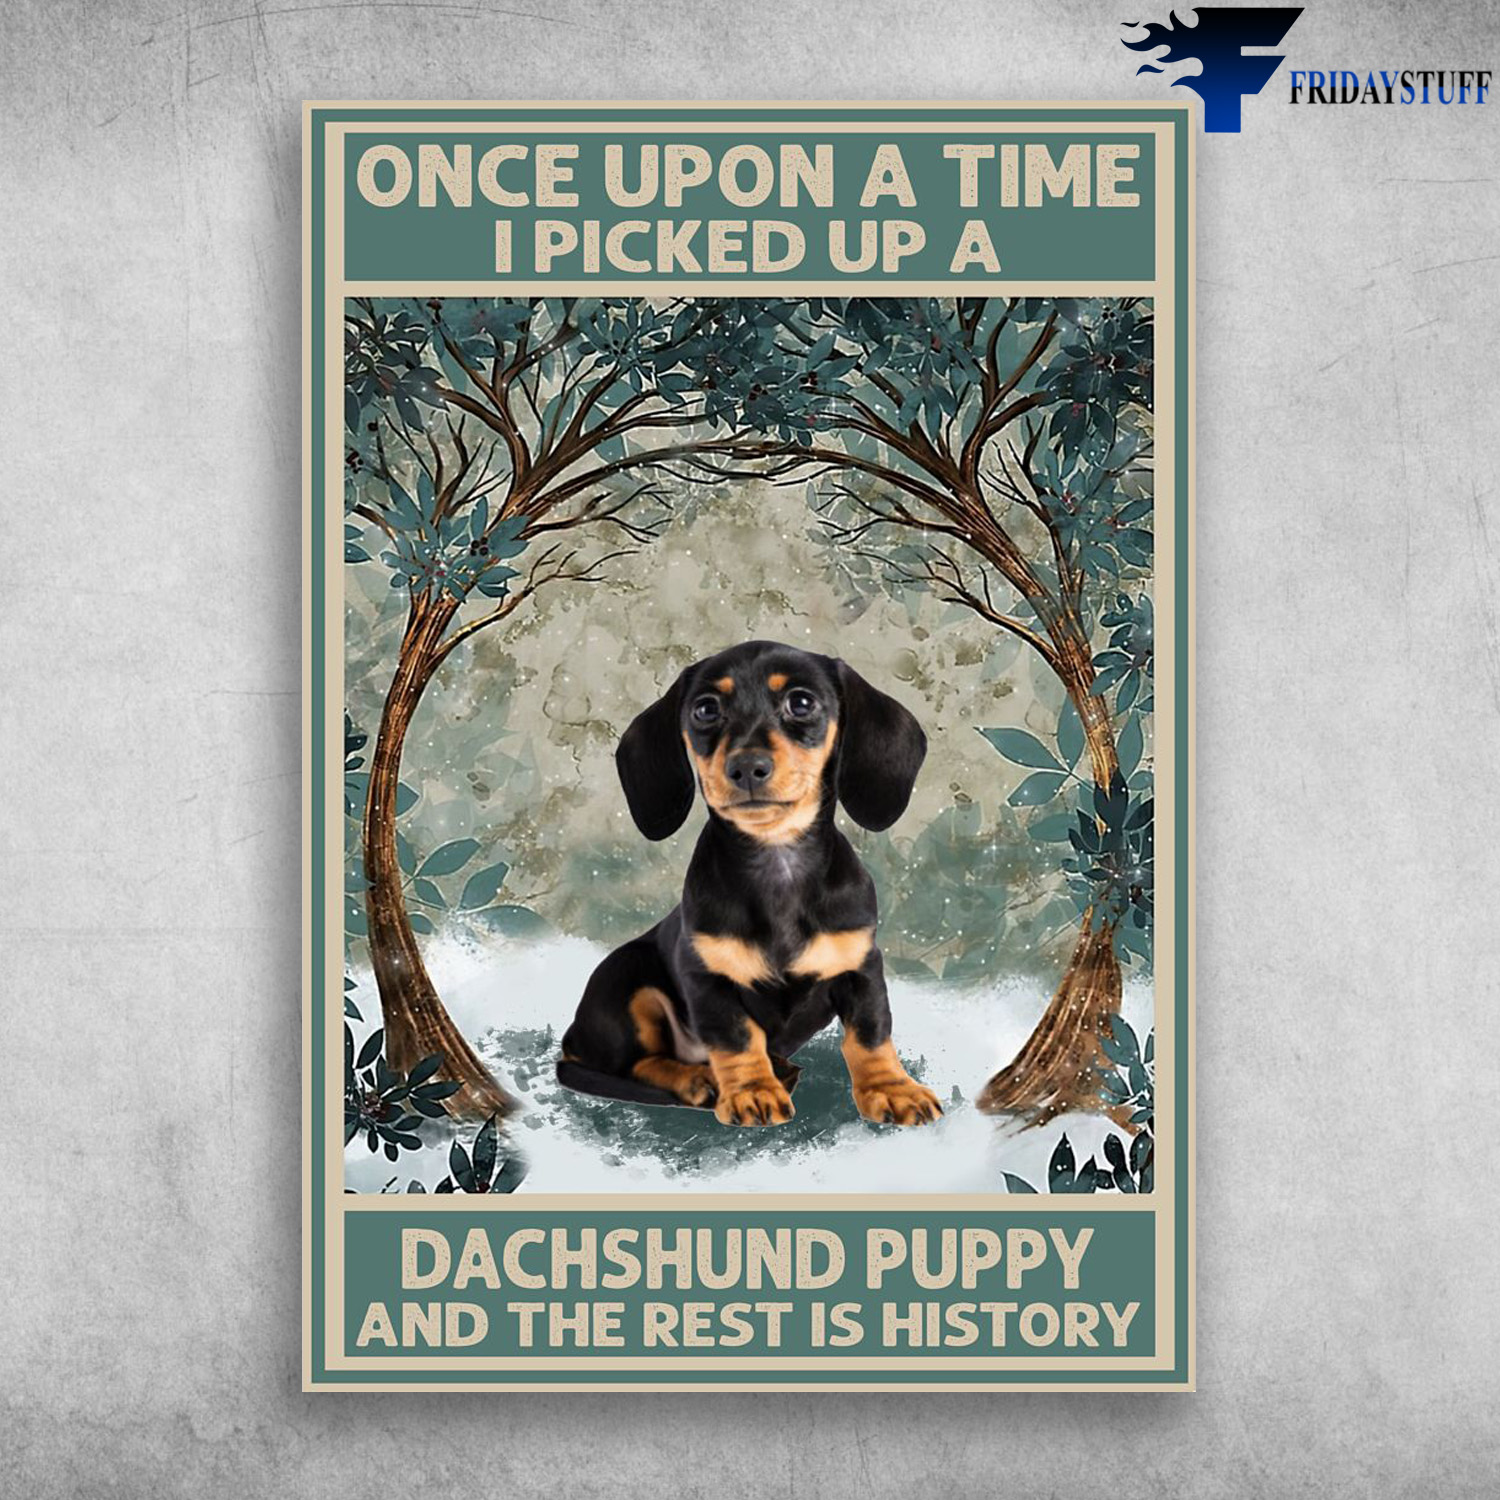 Dachshund Puppy - Once Upon A Time, I Picked Up A Dachshund Puppy, And The Rest Is History